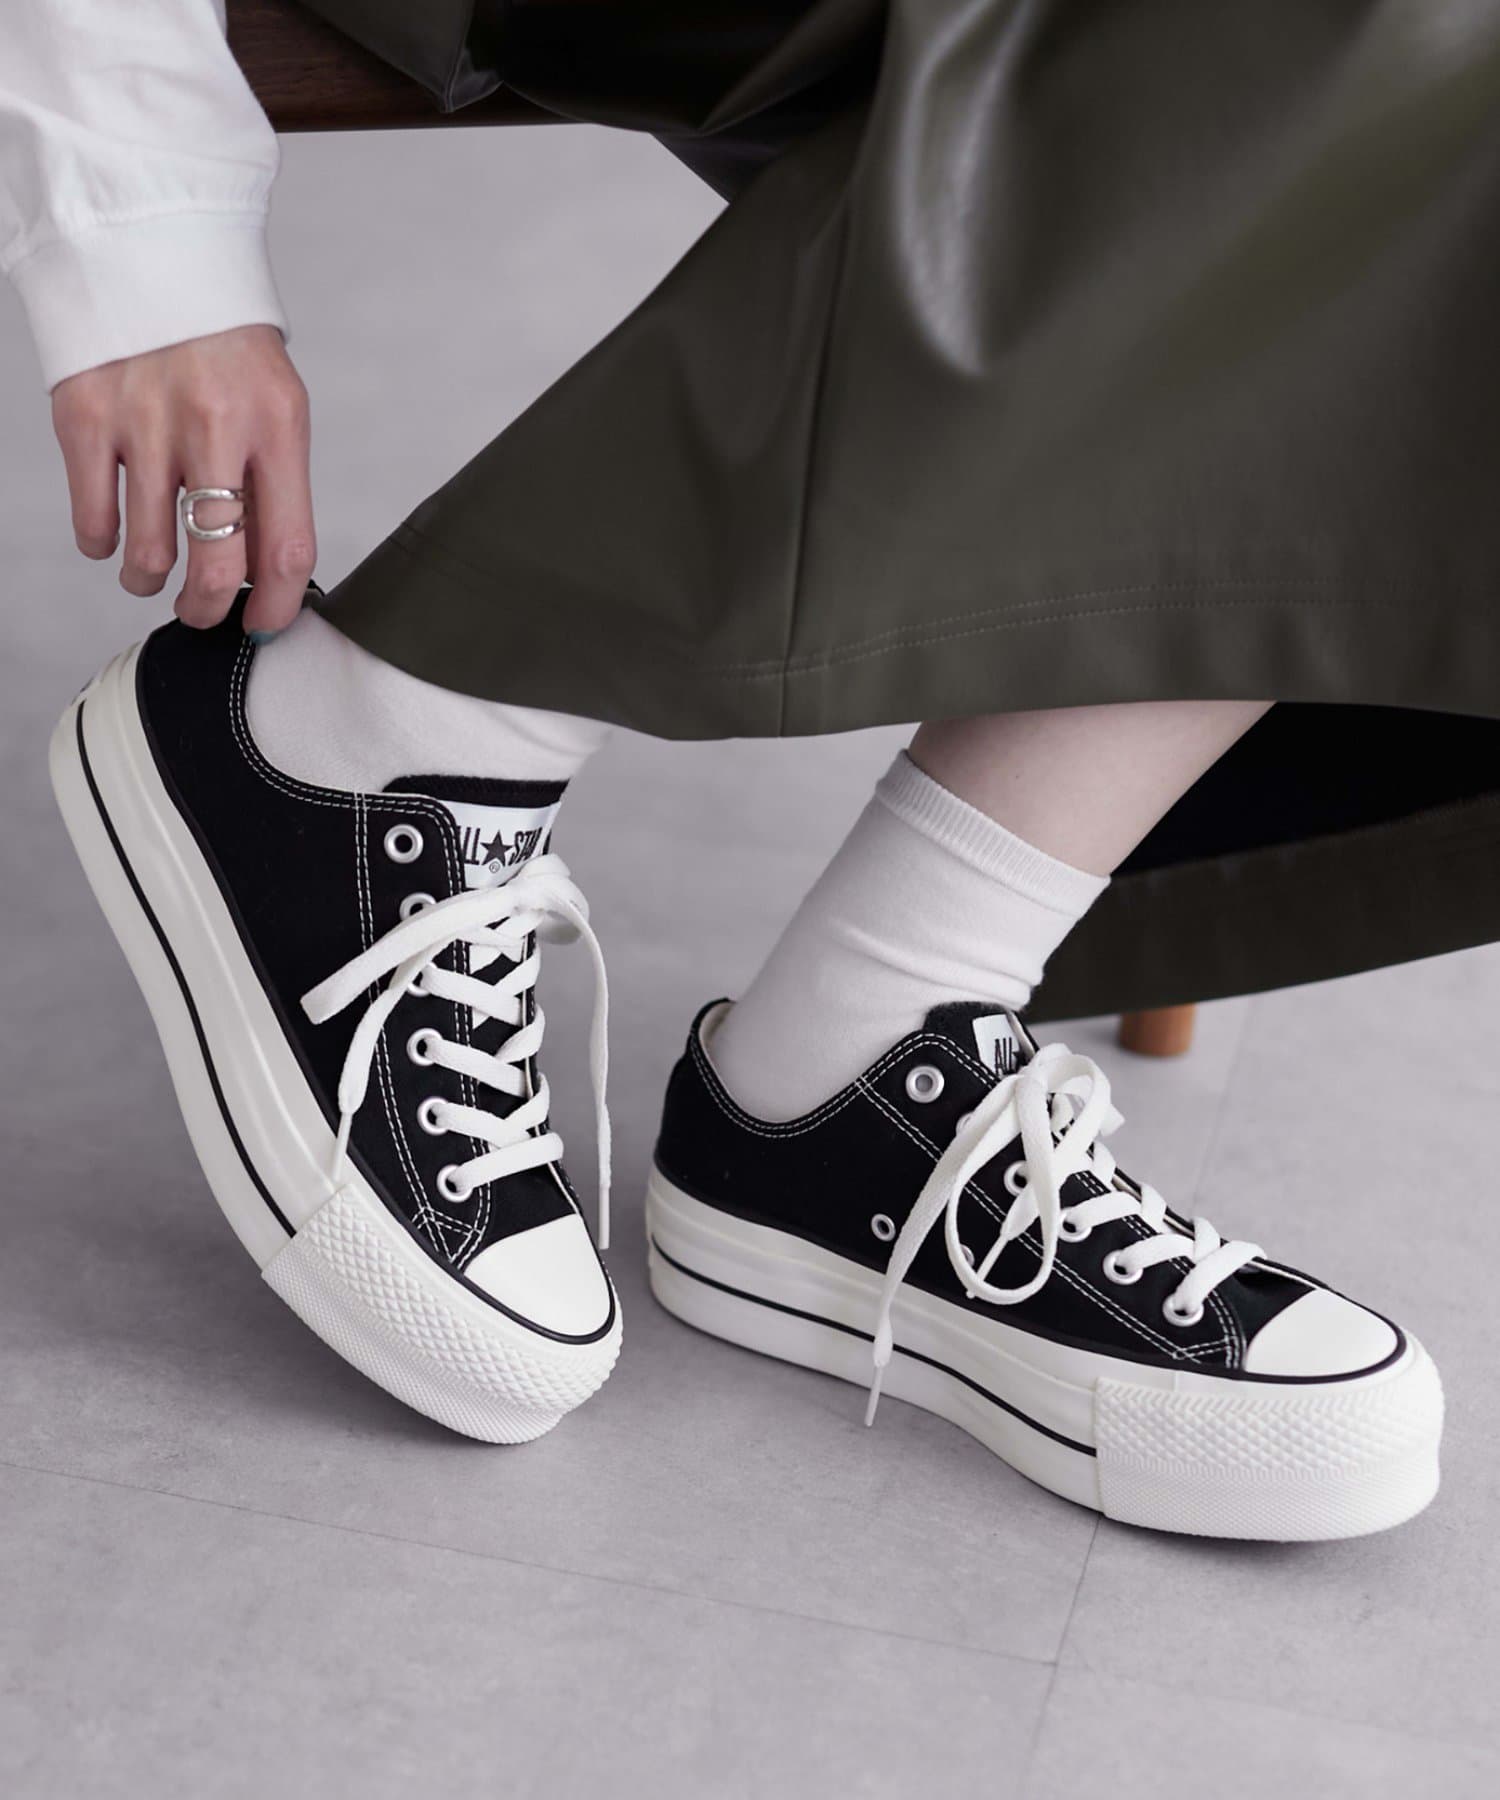 CONVERS】ALL STAR (R) LIFTED OX | CIAOPANIC TYPY(チャオパニック 